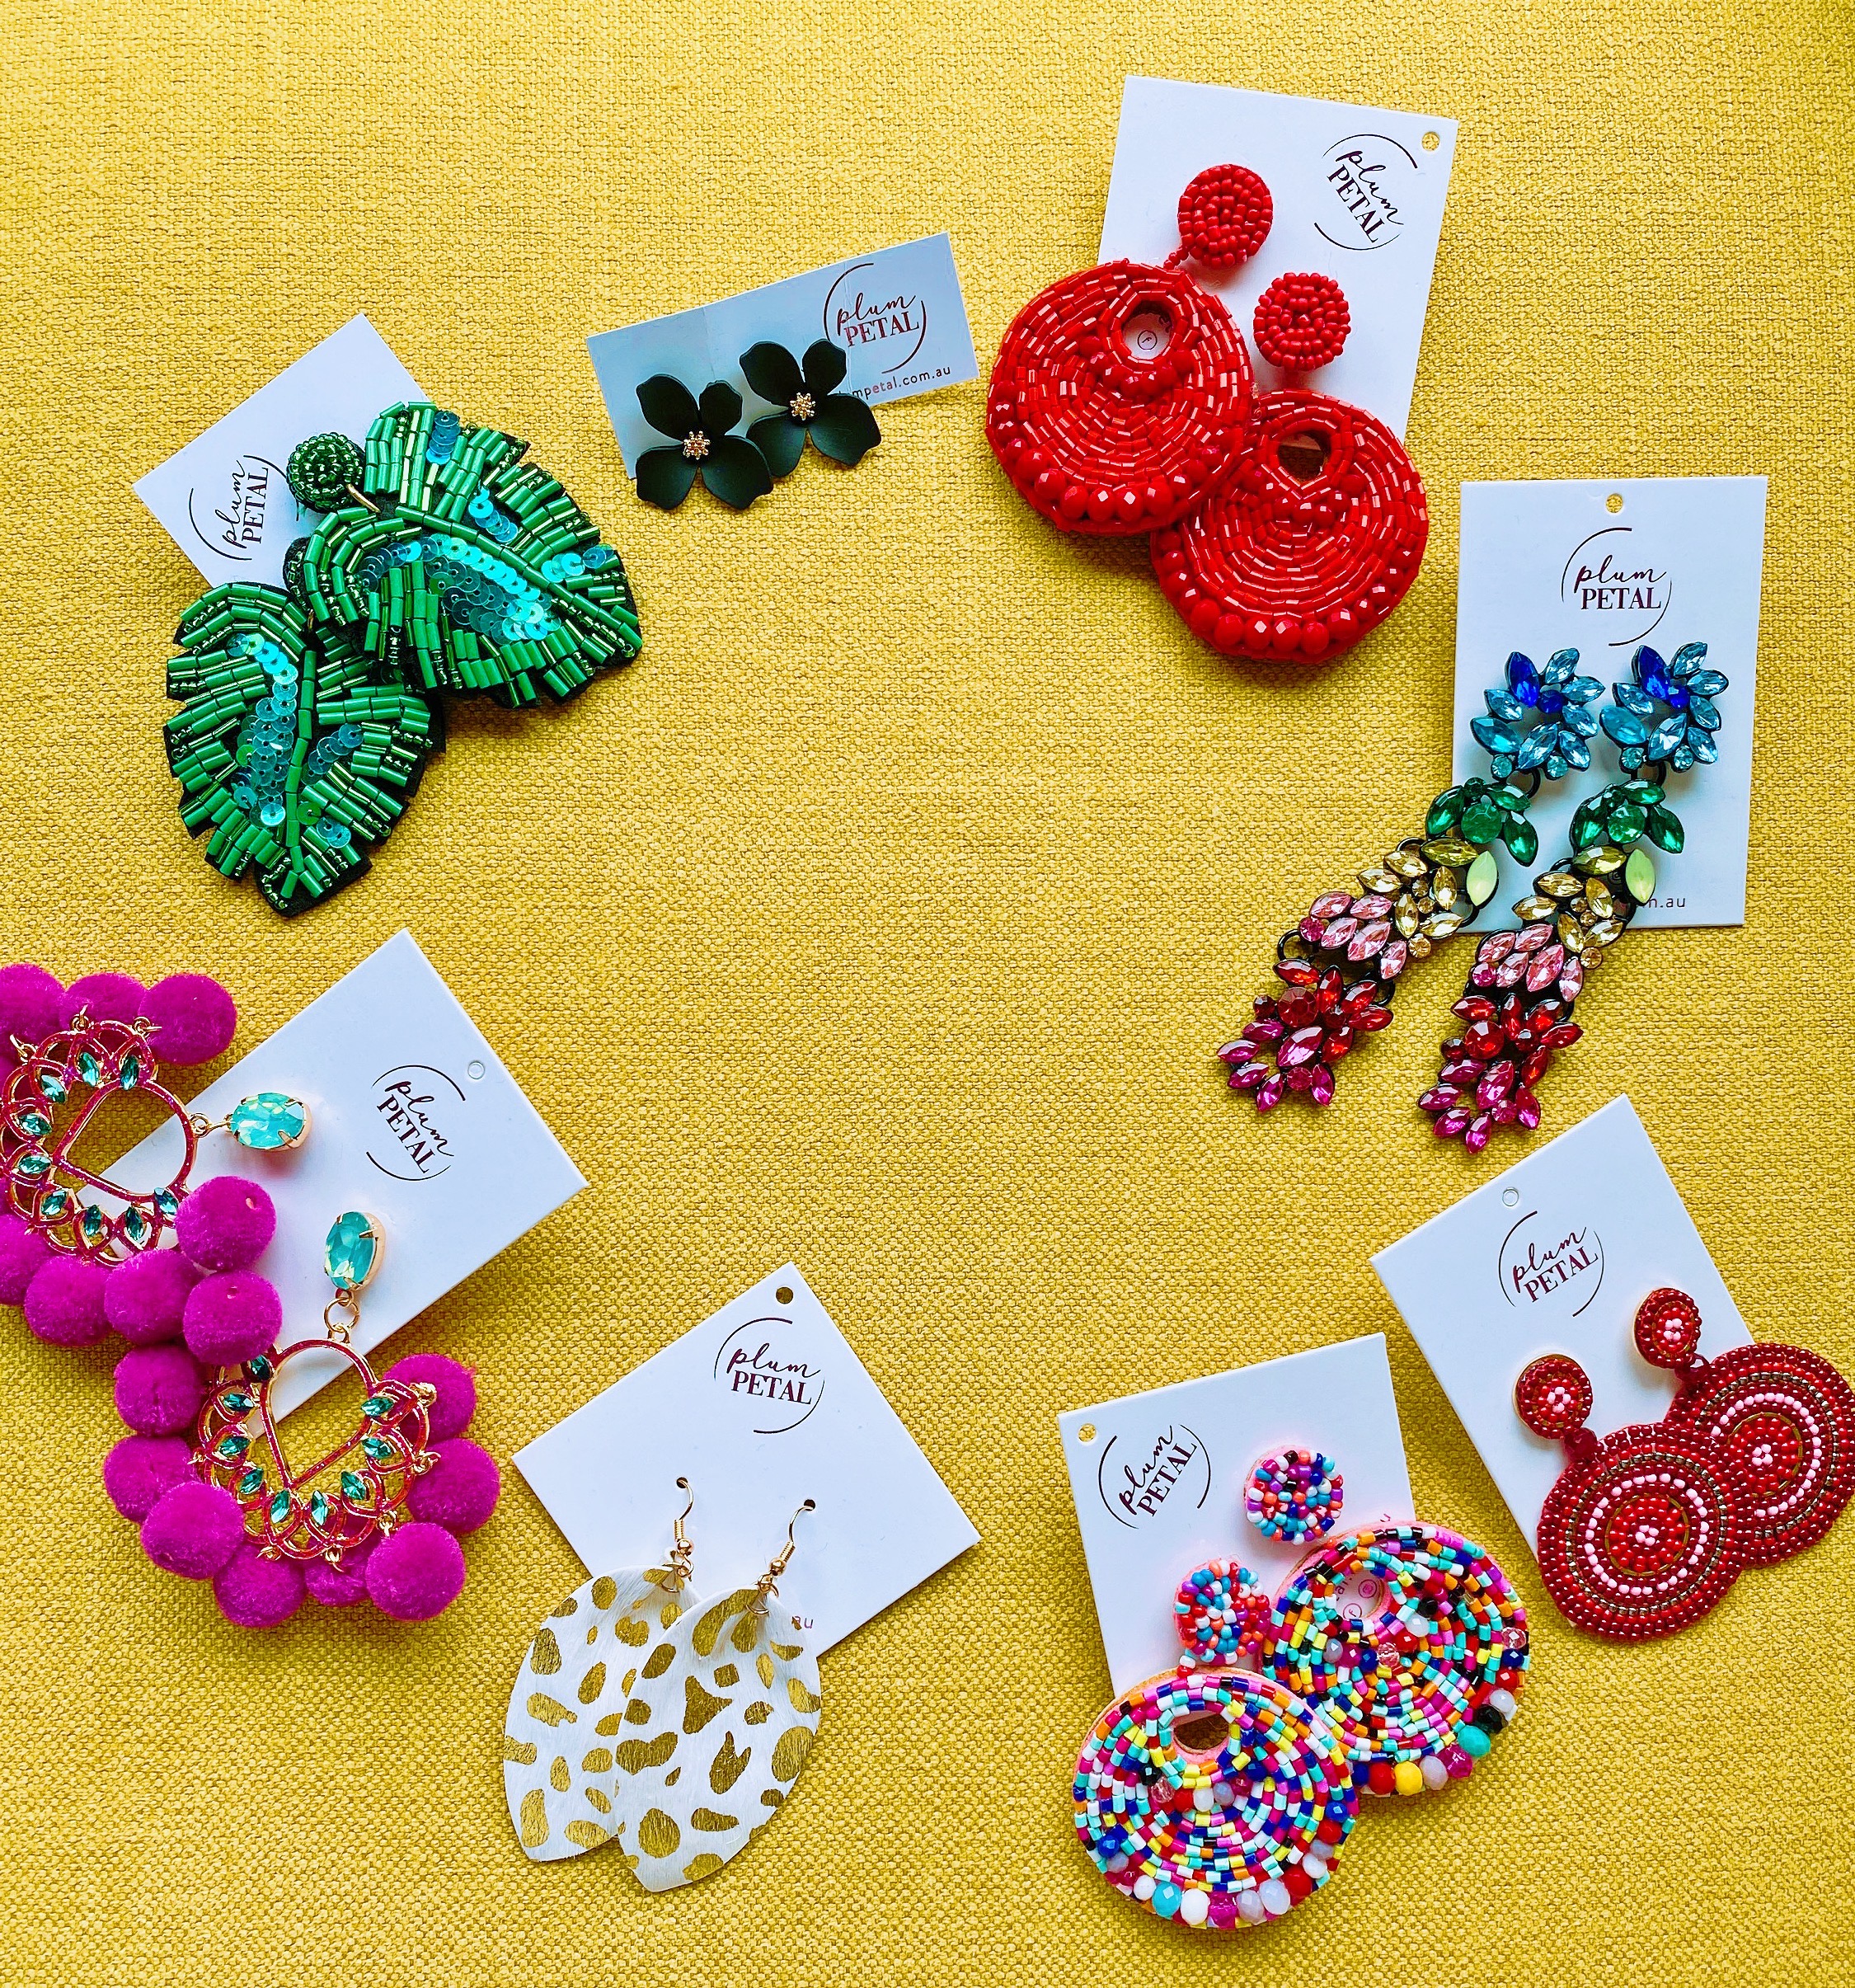 WIN $200 to spend on earrings from the Plum Petal online store